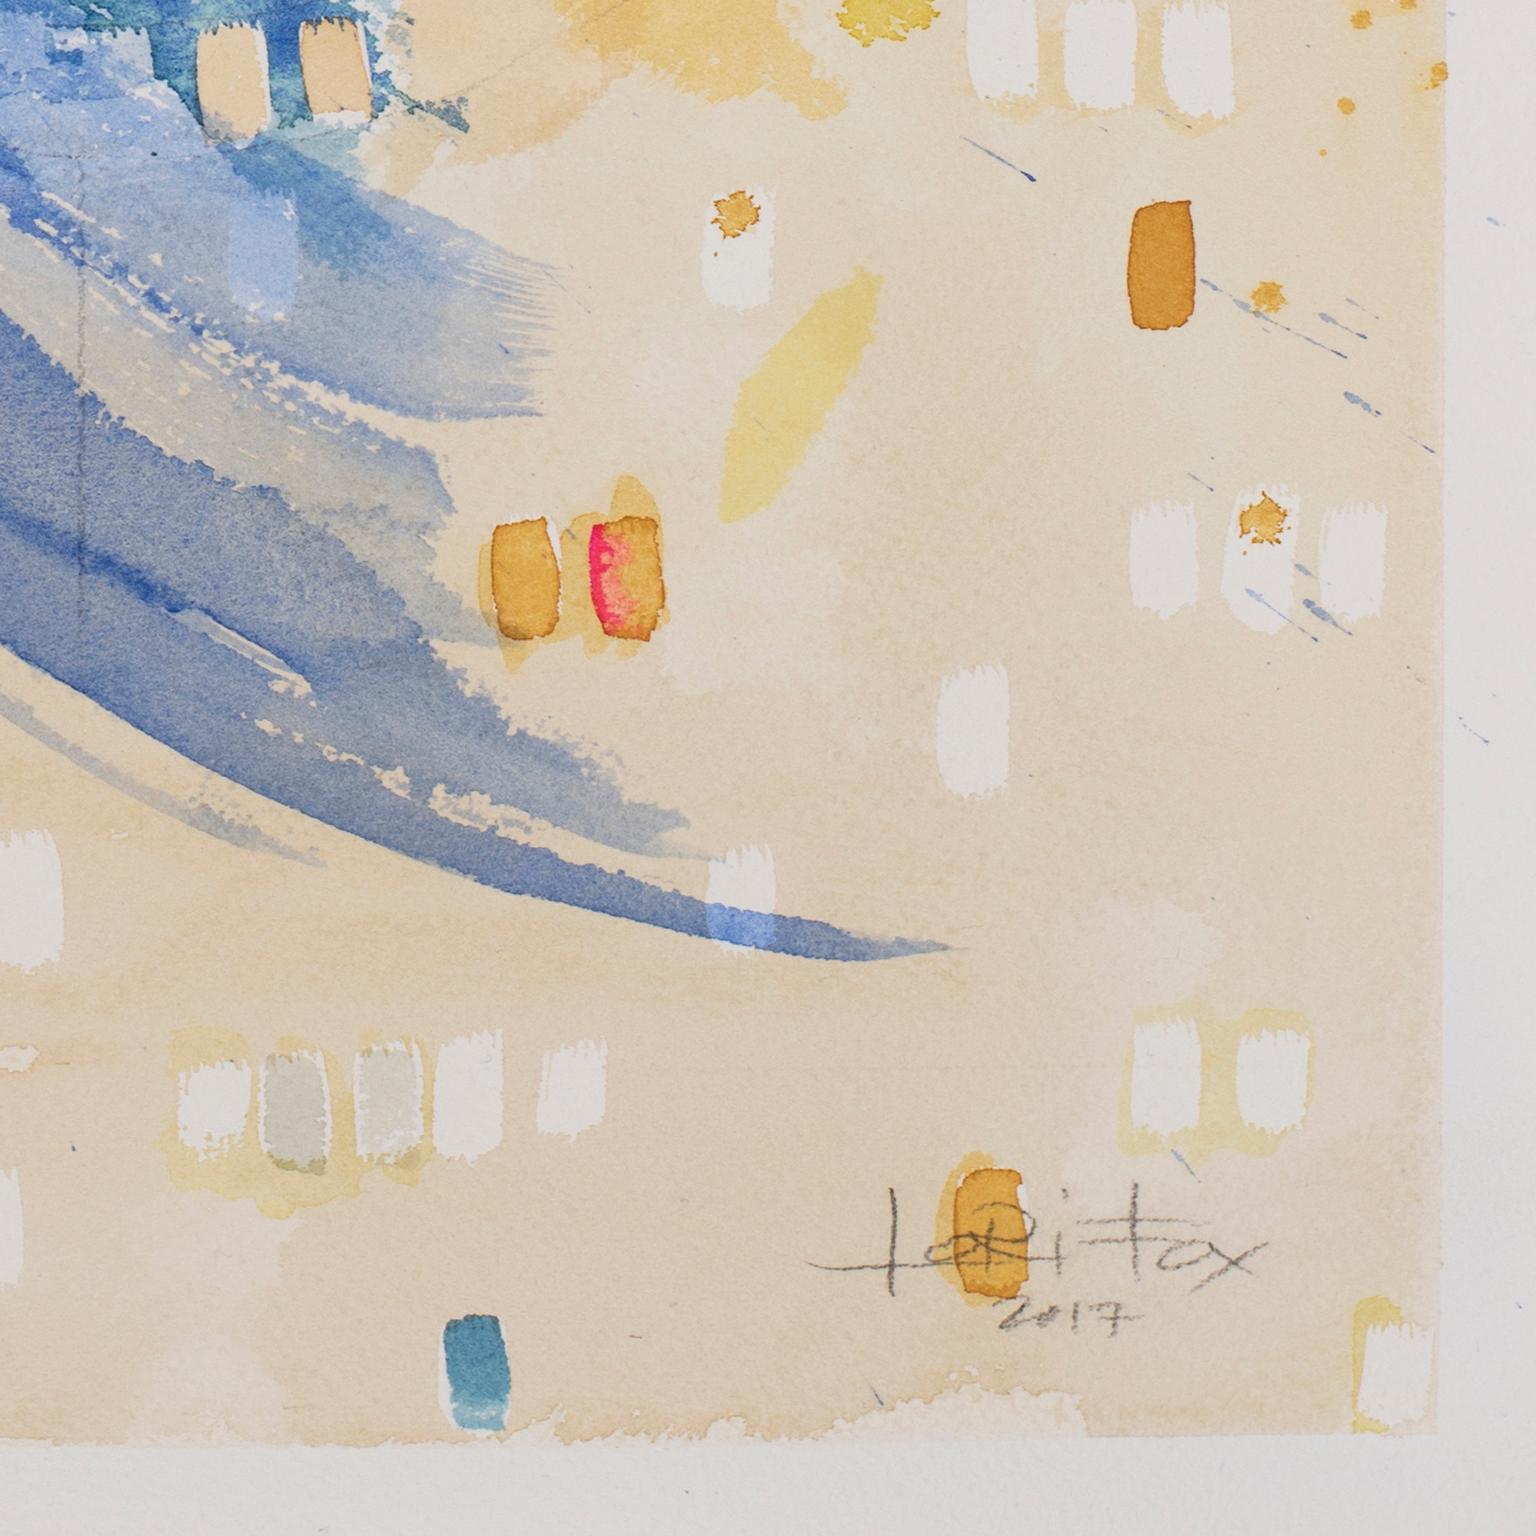 Waxing Crescent “Regeneration” by Lori Fox. Abstract watercolor on paper. Blue For Sale 5